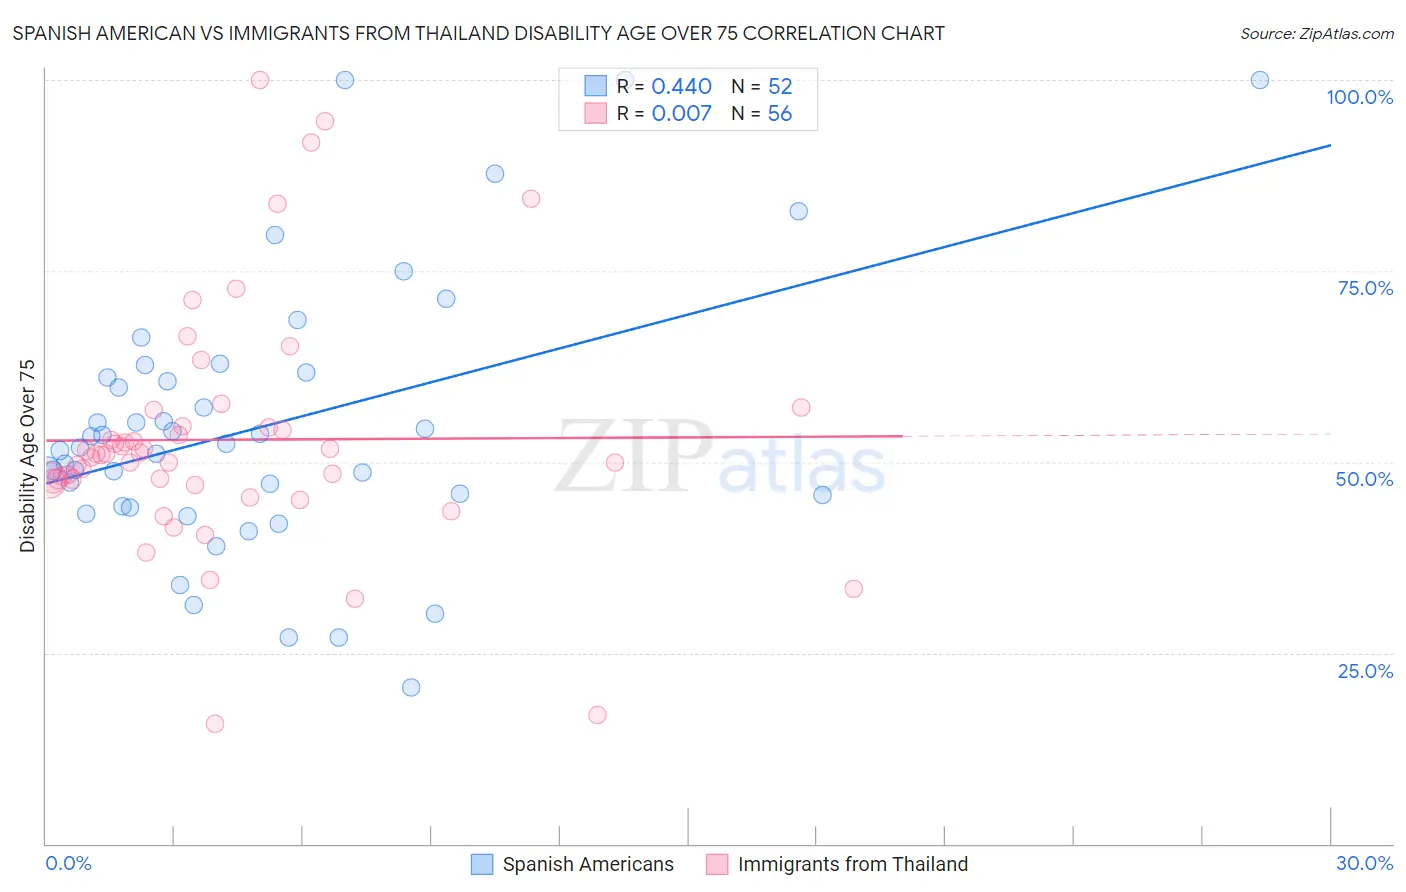 Spanish American vs Immigrants from Thailand Disability Age Over 75